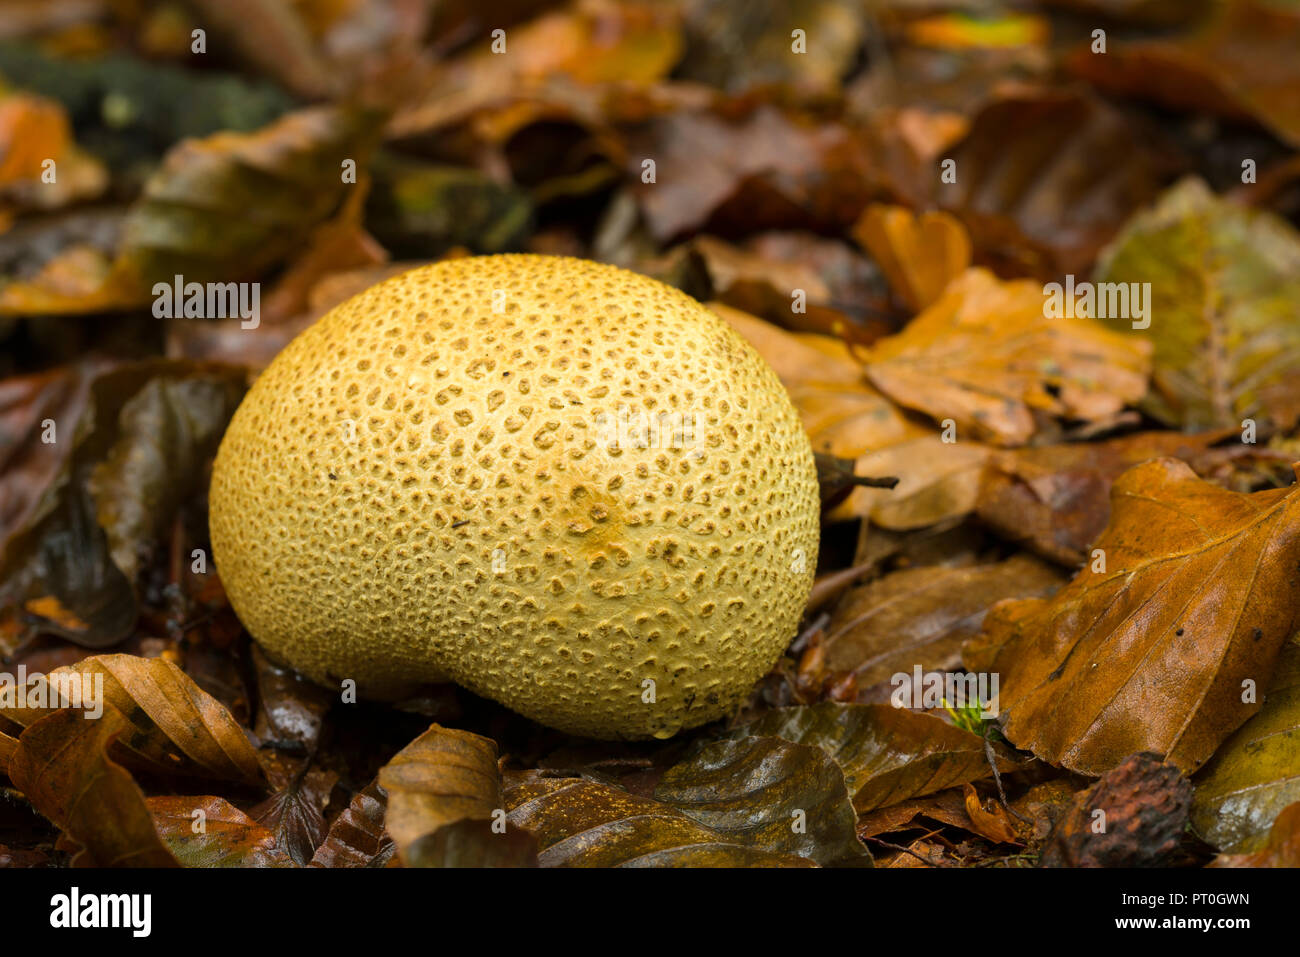 Common Earthball (Scleroderma citrinum) mushrooms in Beacon Hill Wood in the Mendip Hills, Somerset, England. Also known as Pigskin Poison Puffball. Stock Photo